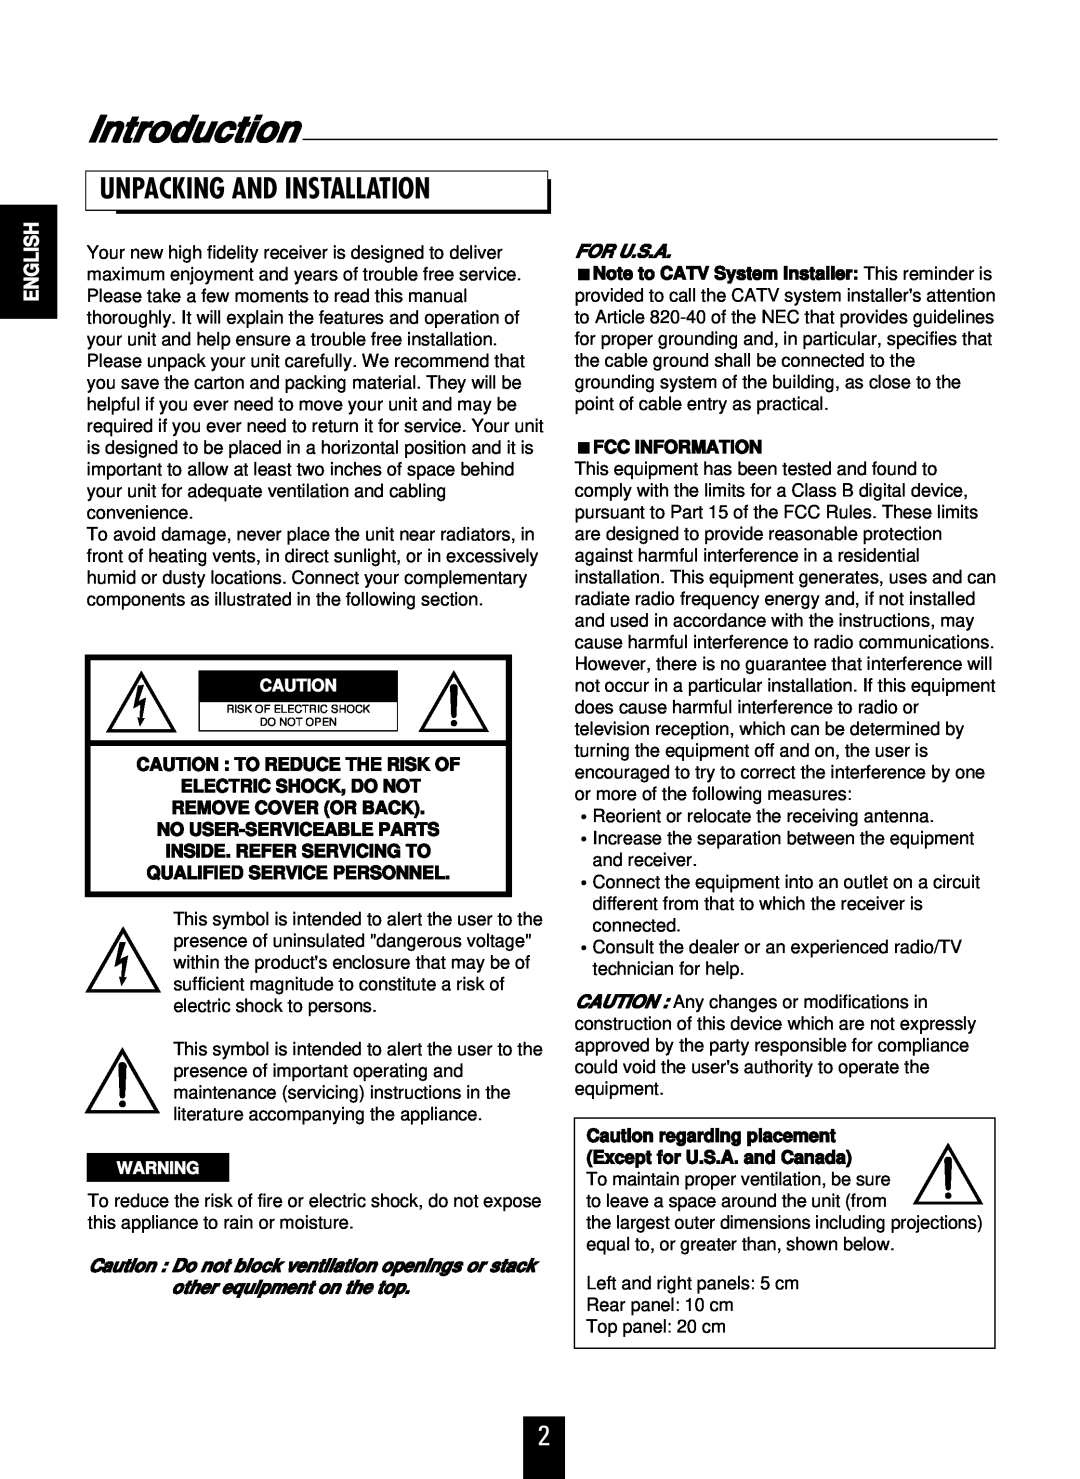 Sherwood RD-7106 Introduction, Unpacking And Installation, English, Caution To Reduce The Risk Of, Electric Shock, Do Not 